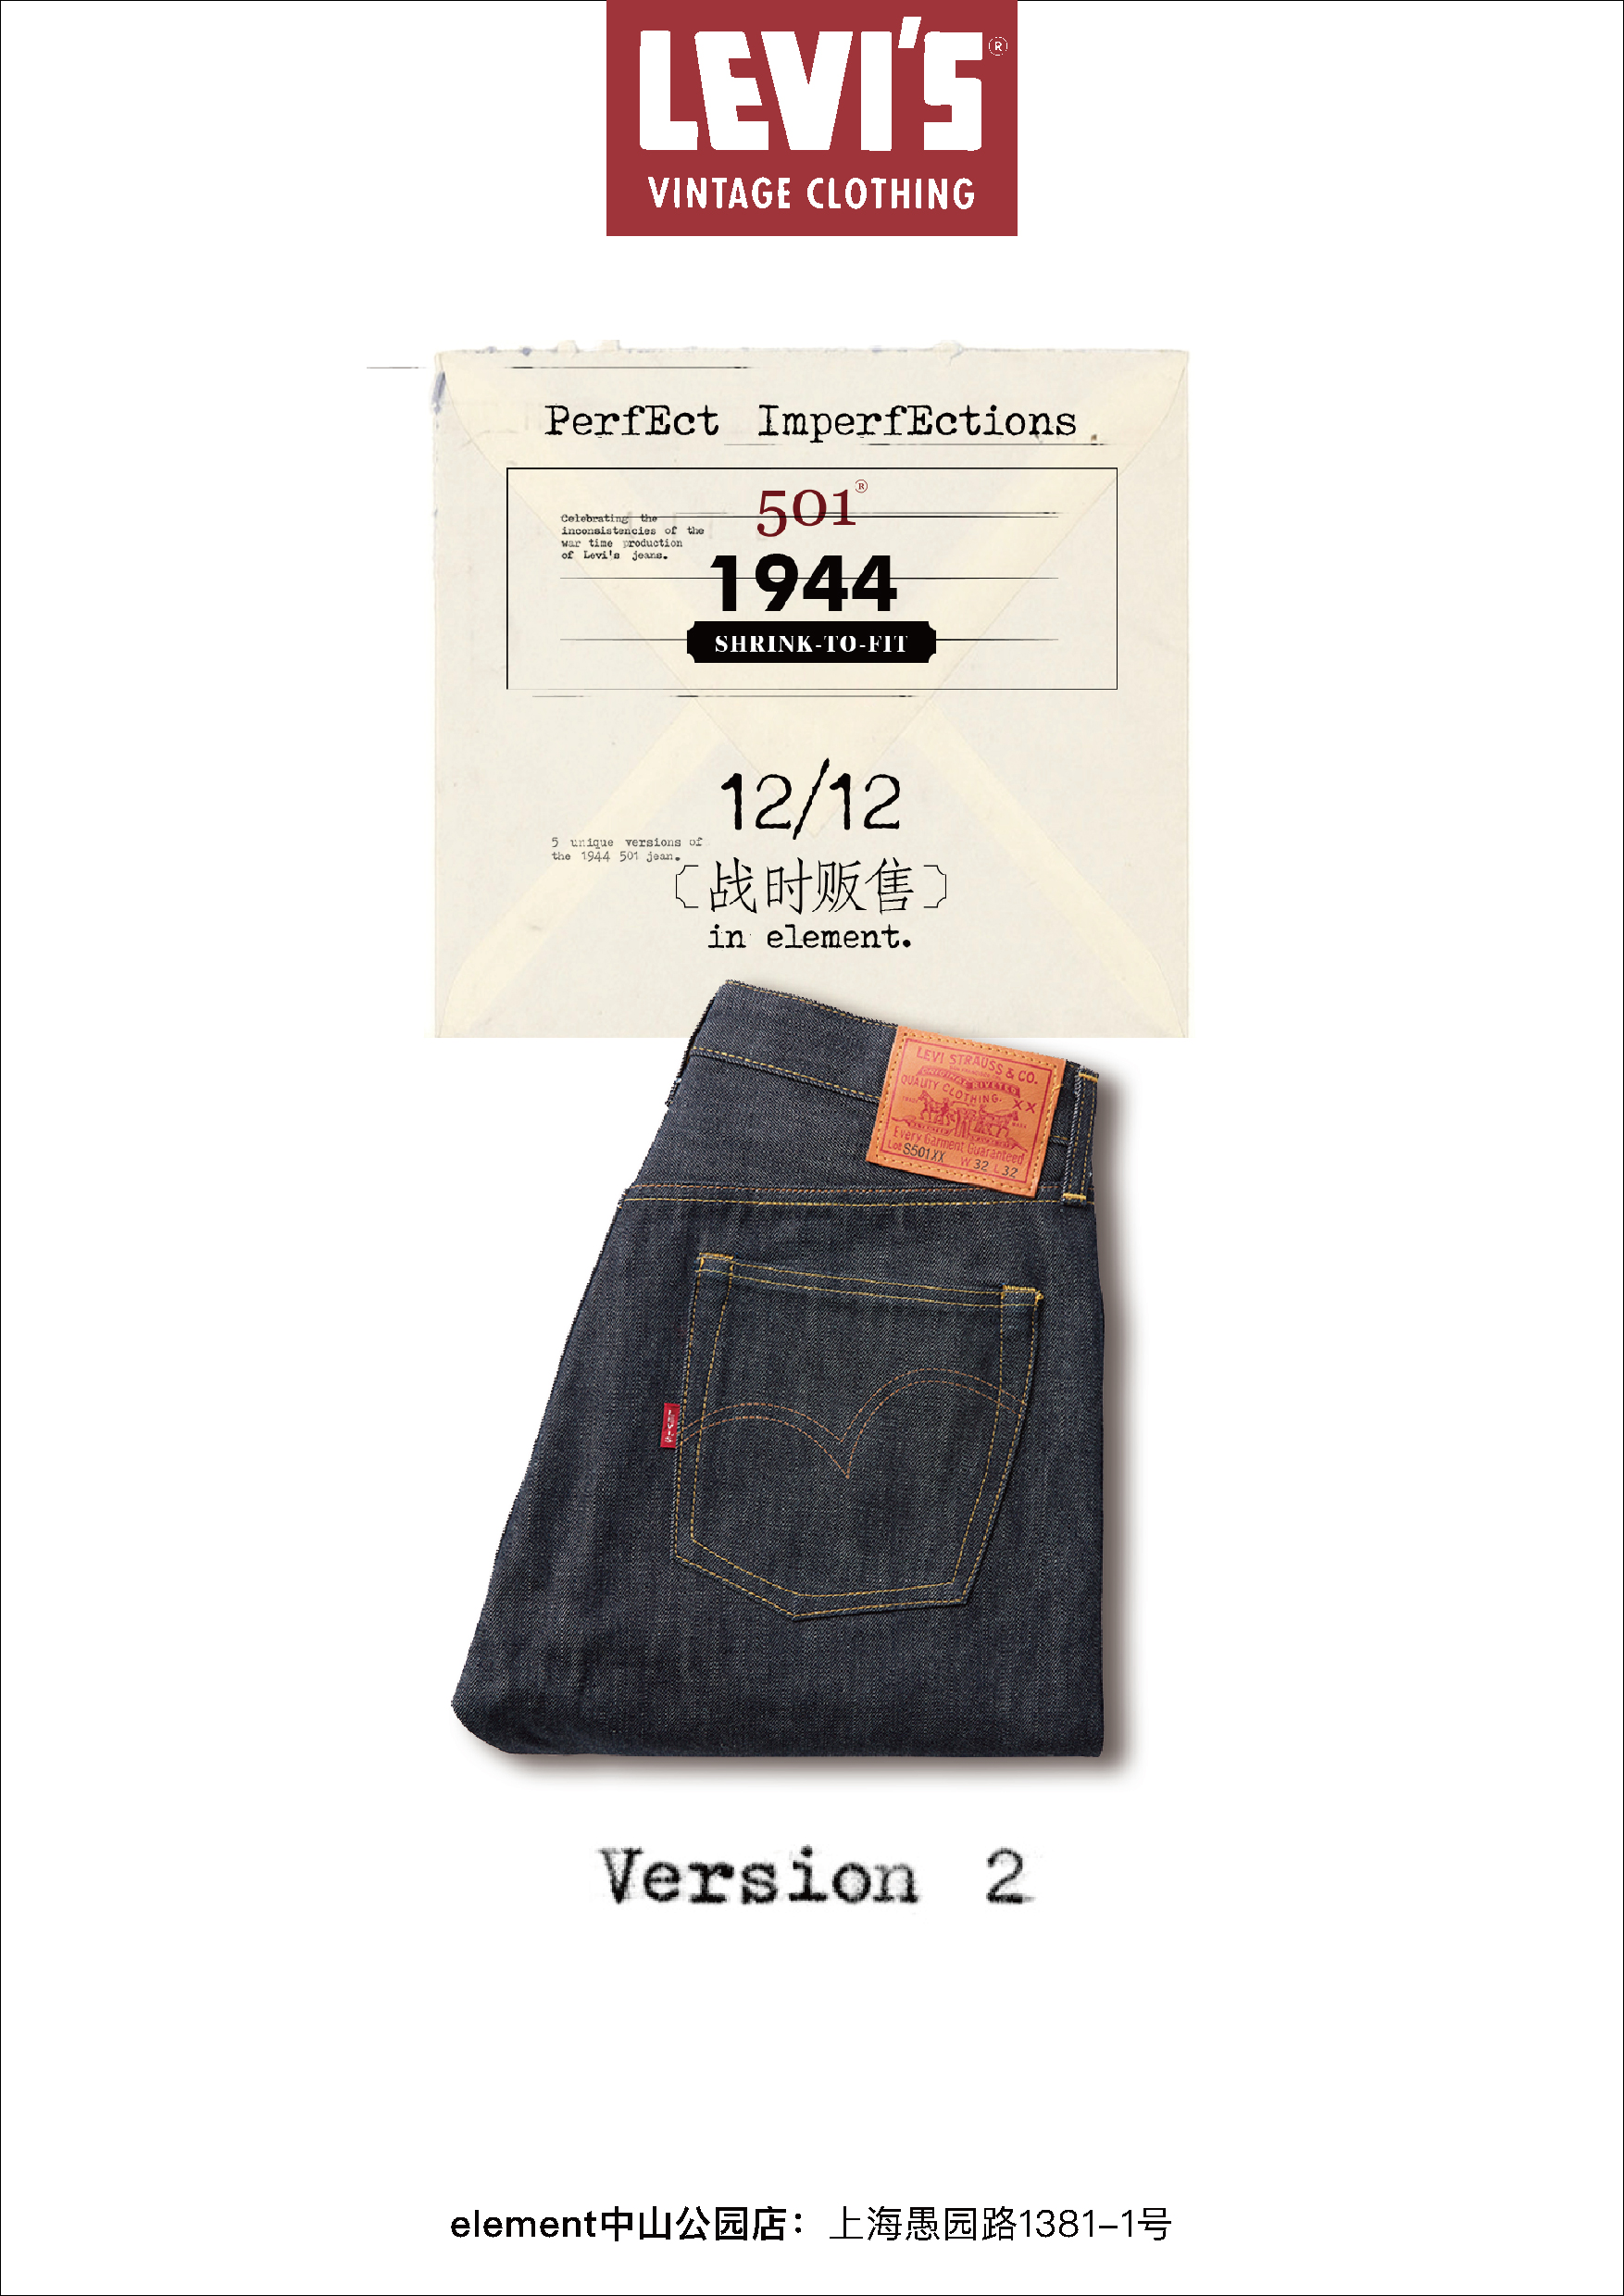 LEVI'S® VINTAGE CLOTHING 最新限量系列「Perfect Imperfection」即将